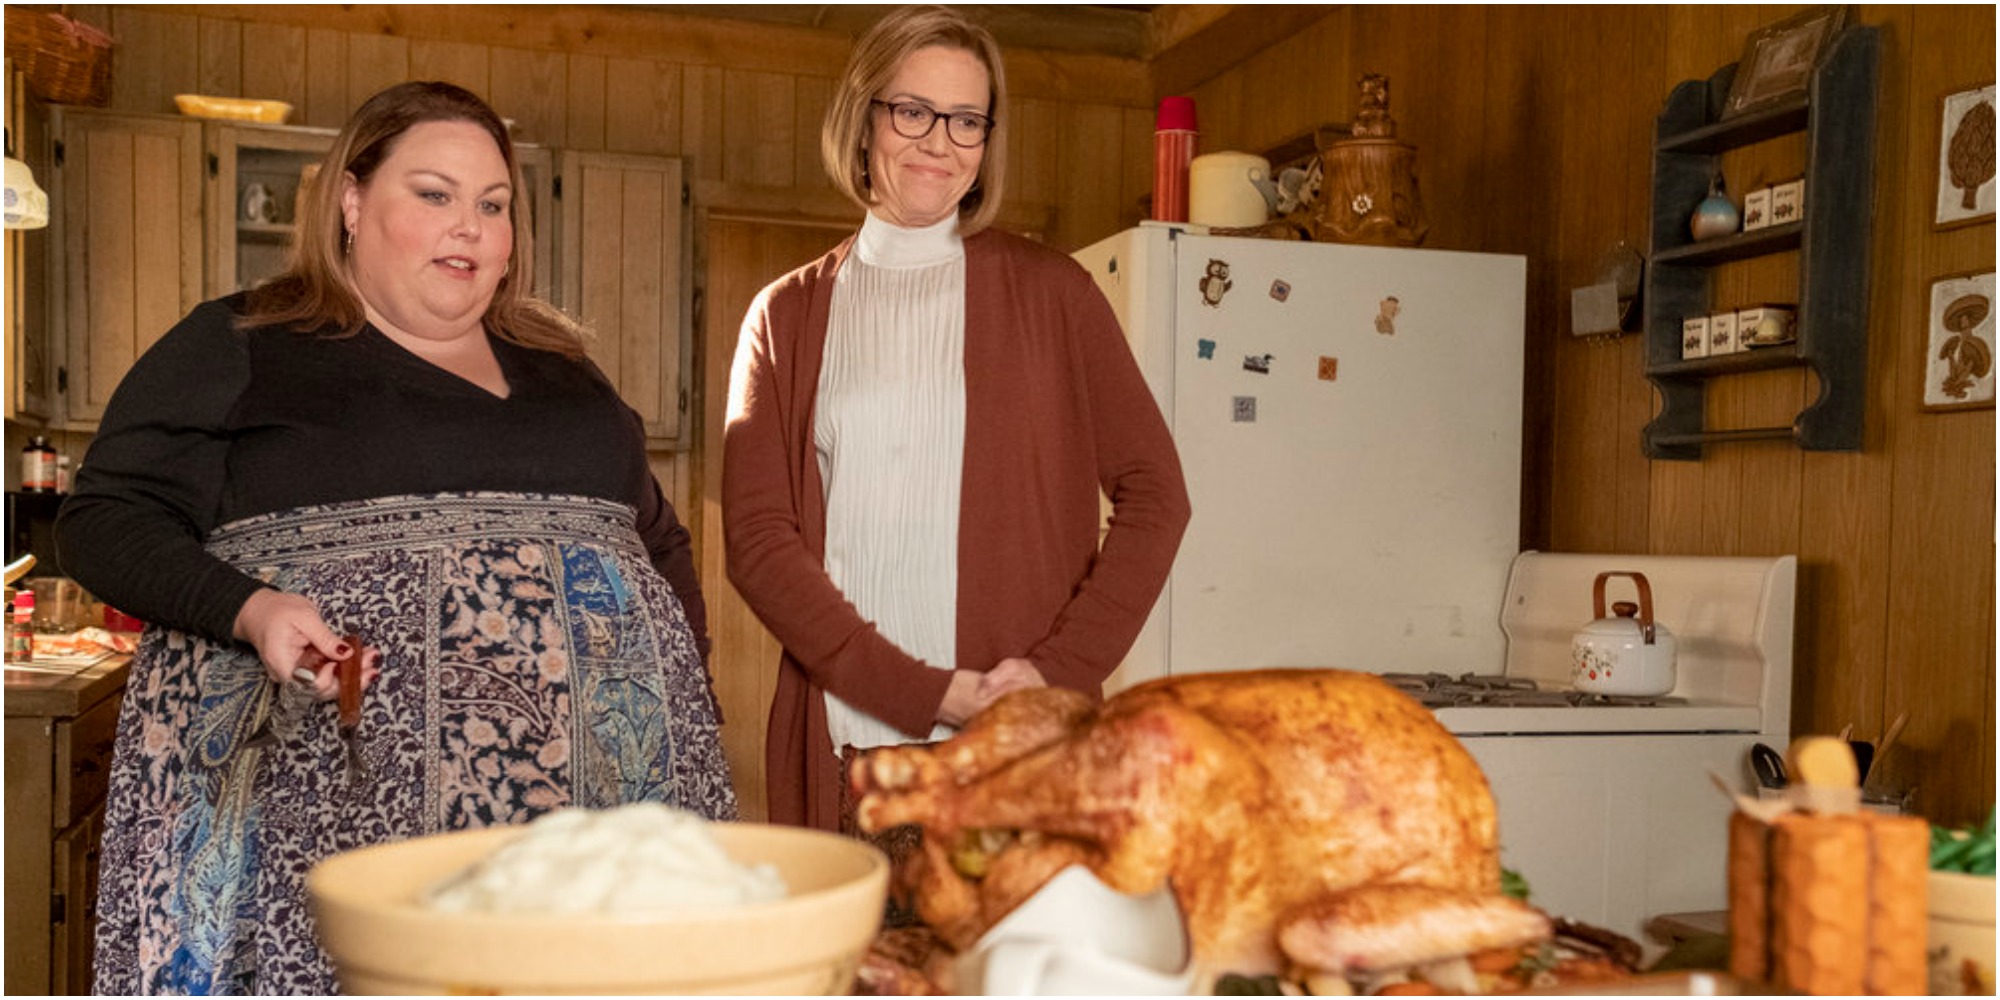 Chrissy Metz and Mandy Moore on the set of This Is Us.